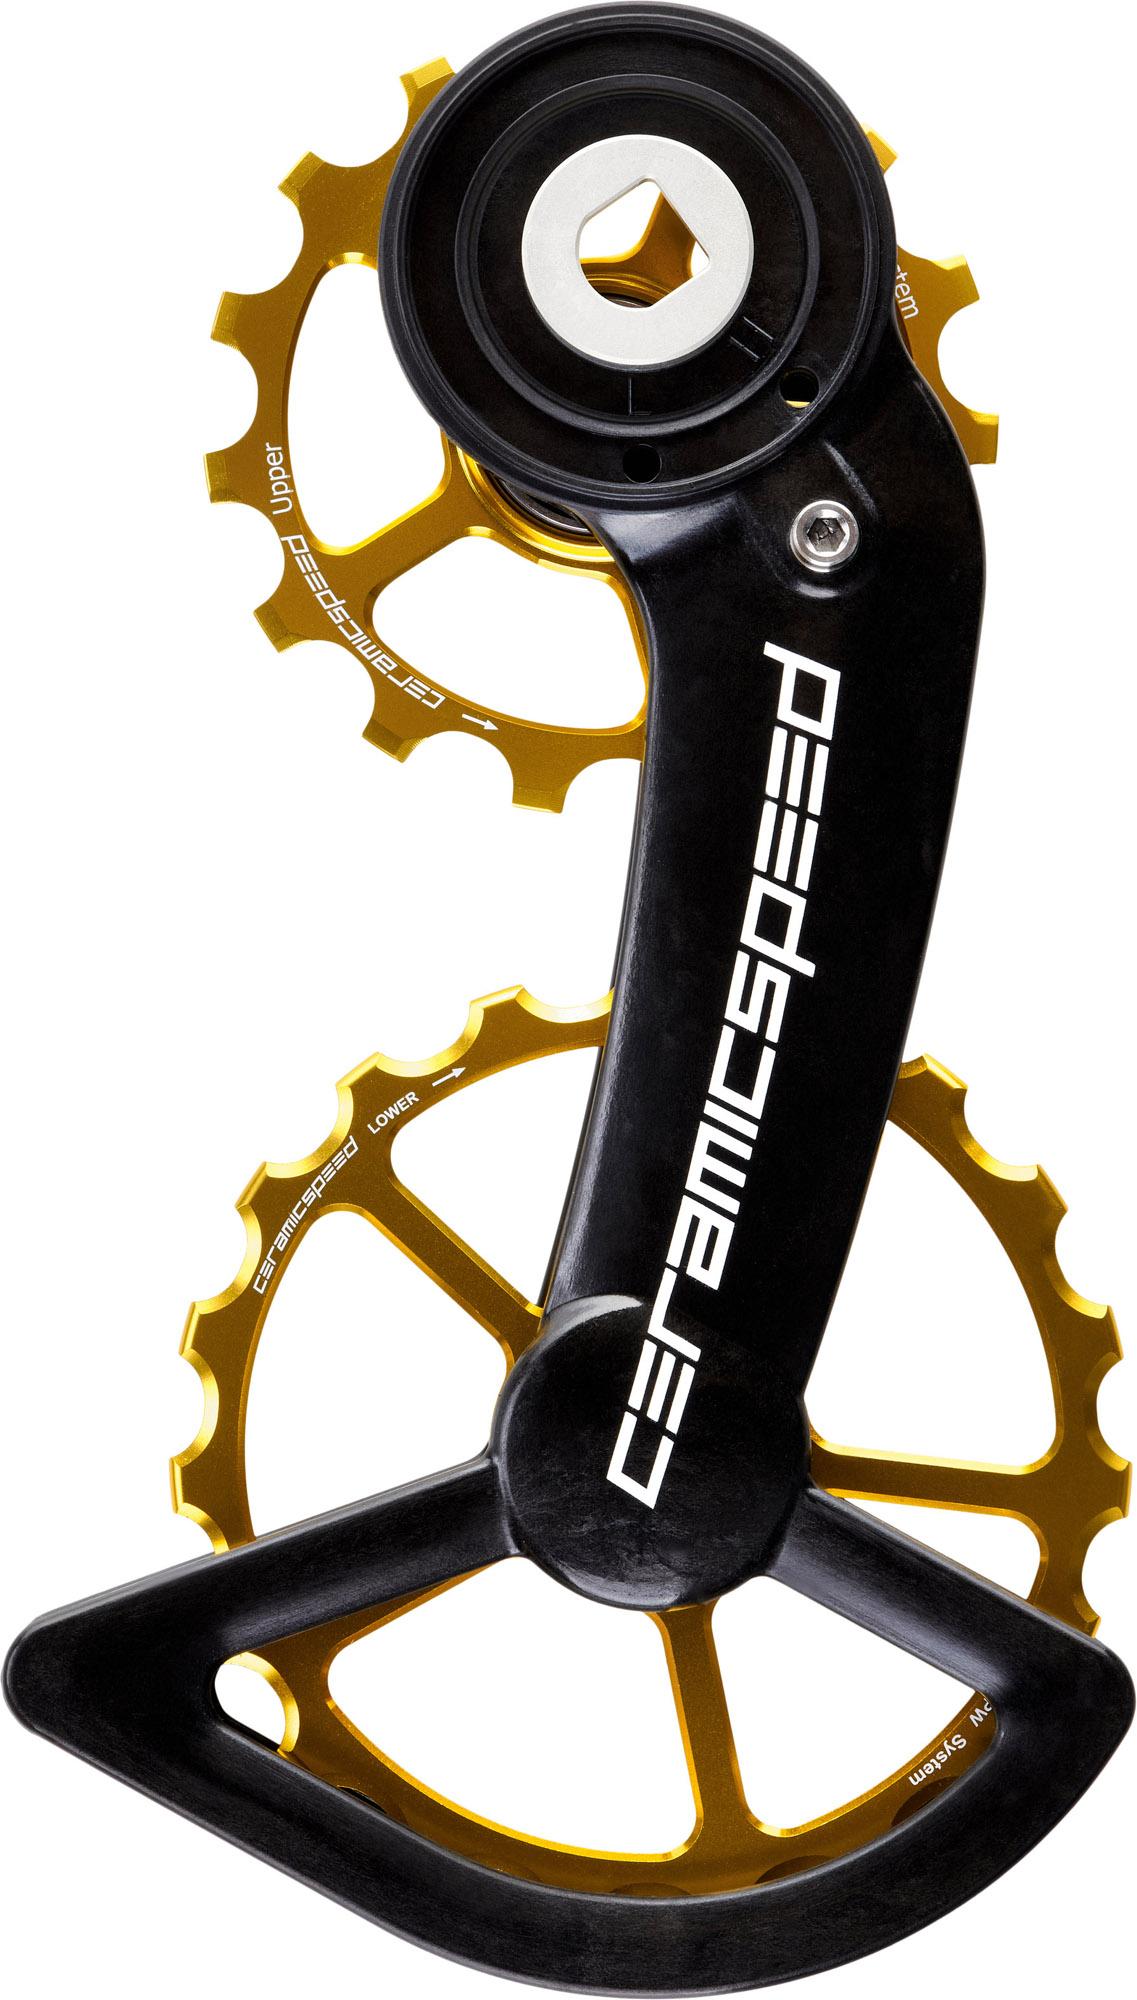 Ceramicspeed Ospw System Sram Red/force Axs Gold